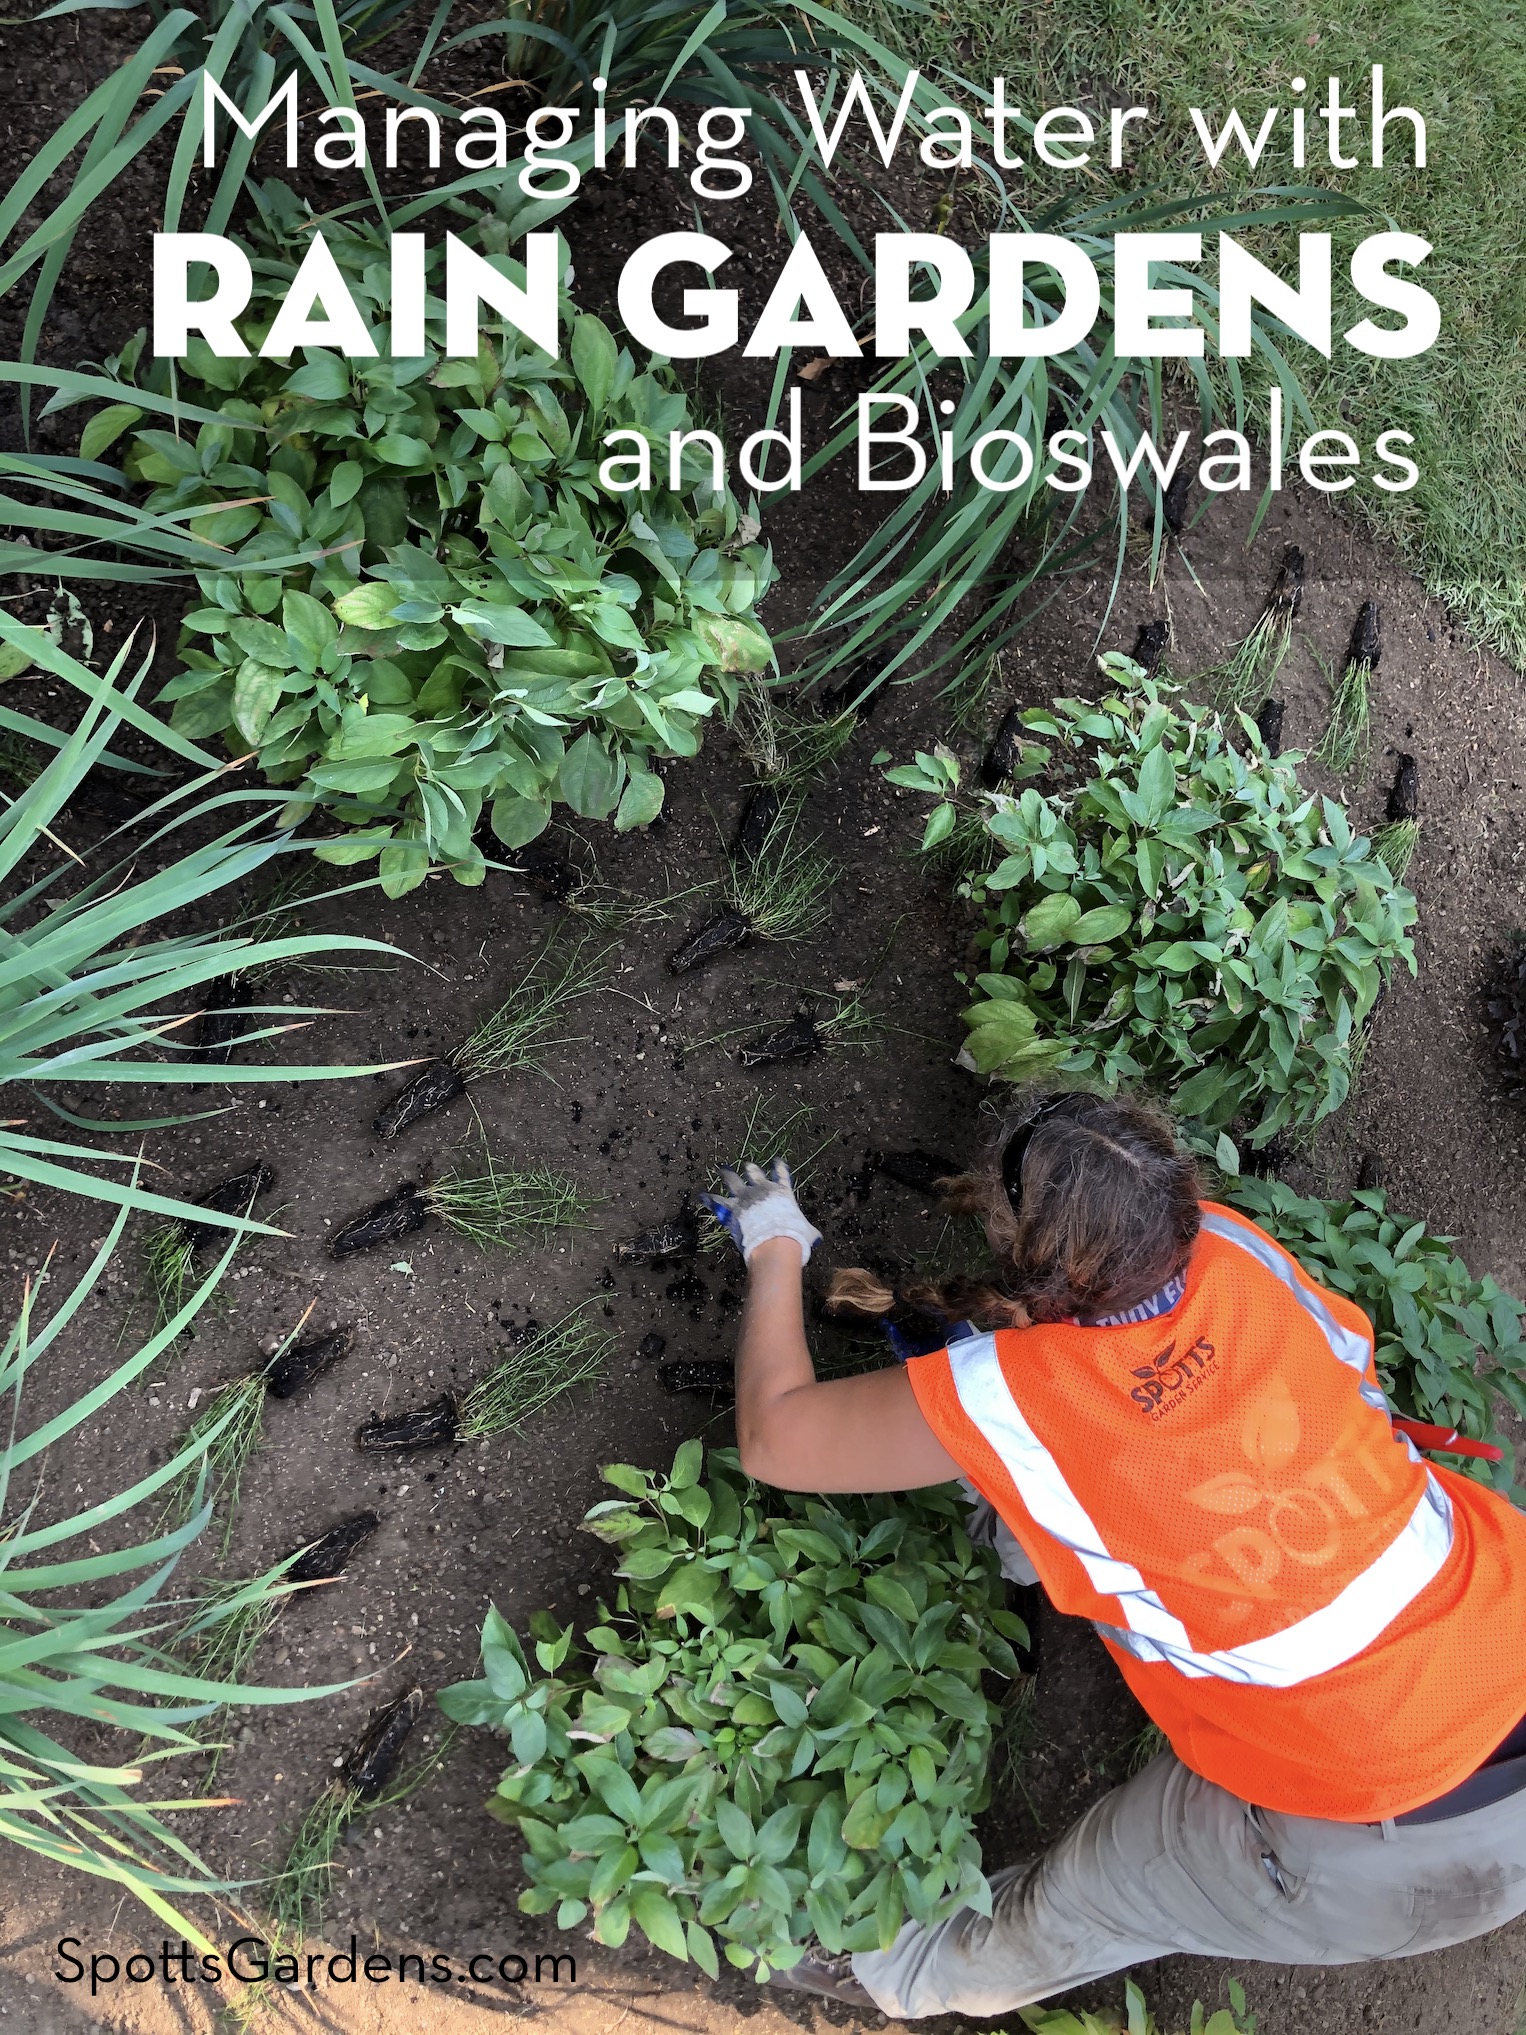 Managing water with rain gardens and bioswales